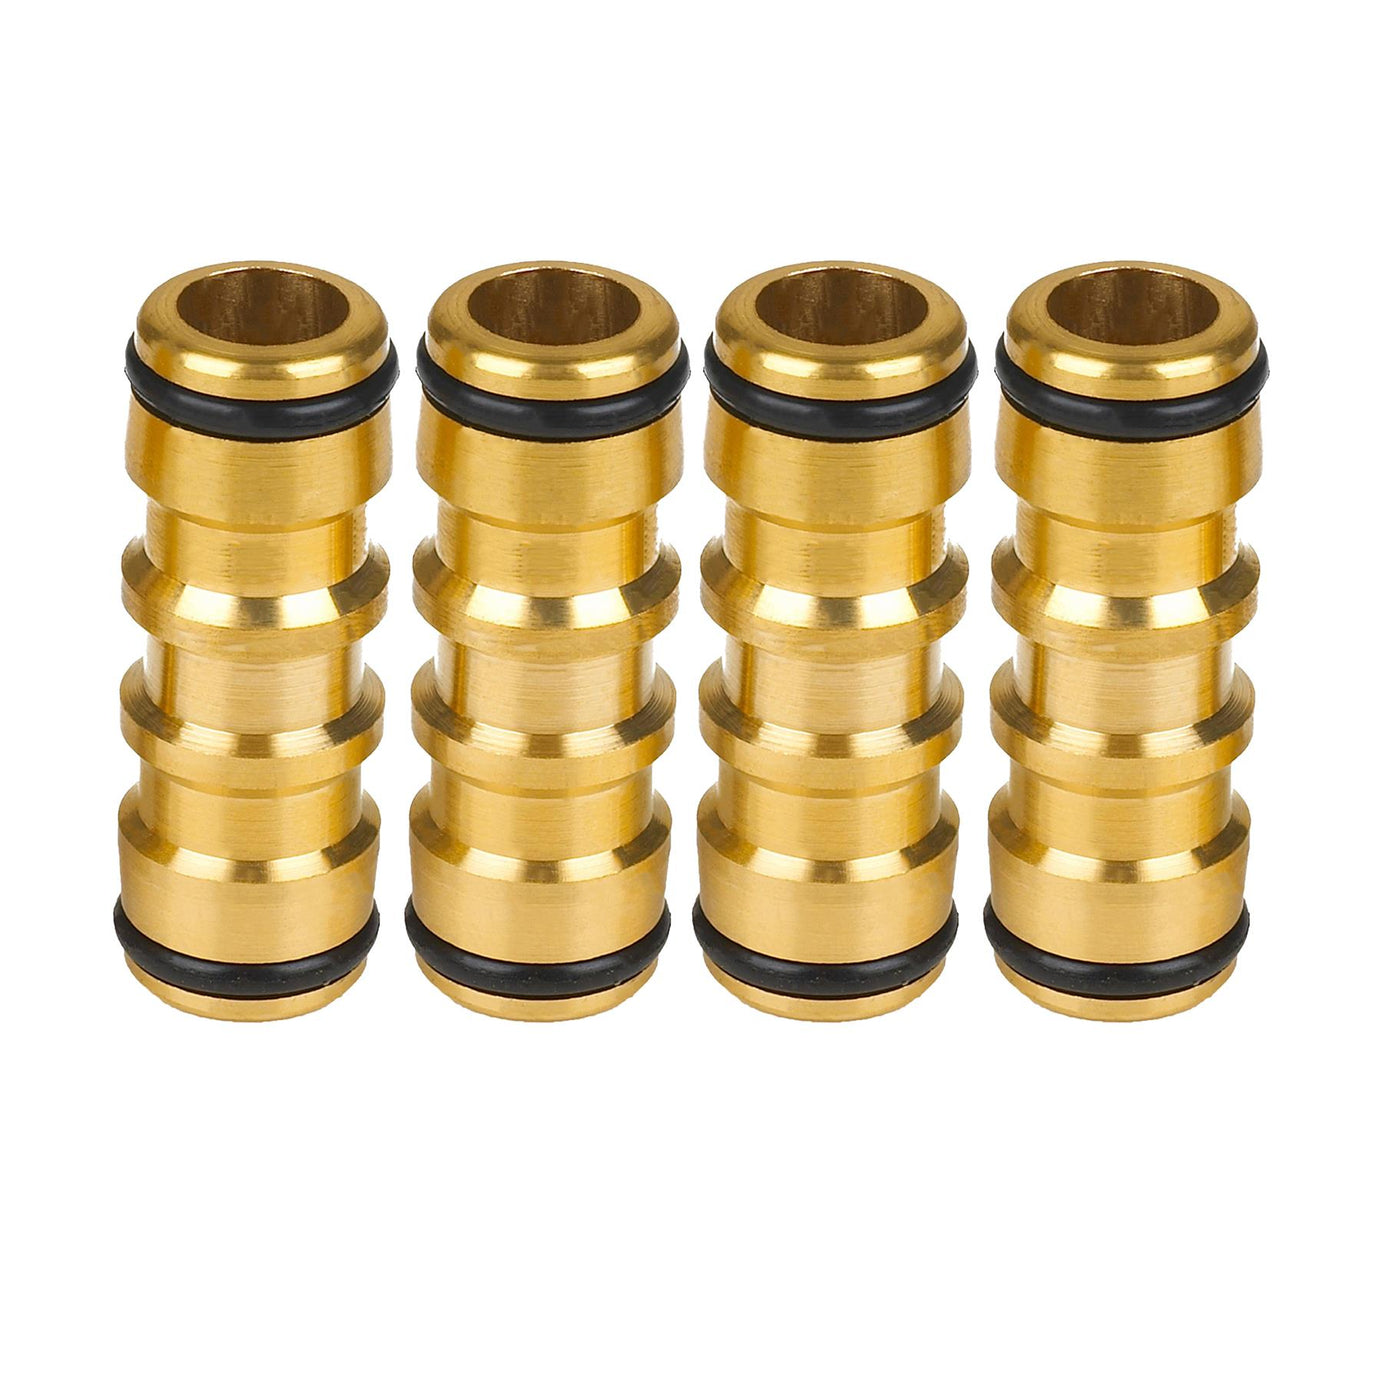 4x Solid 1/2" Brass Quick Connect